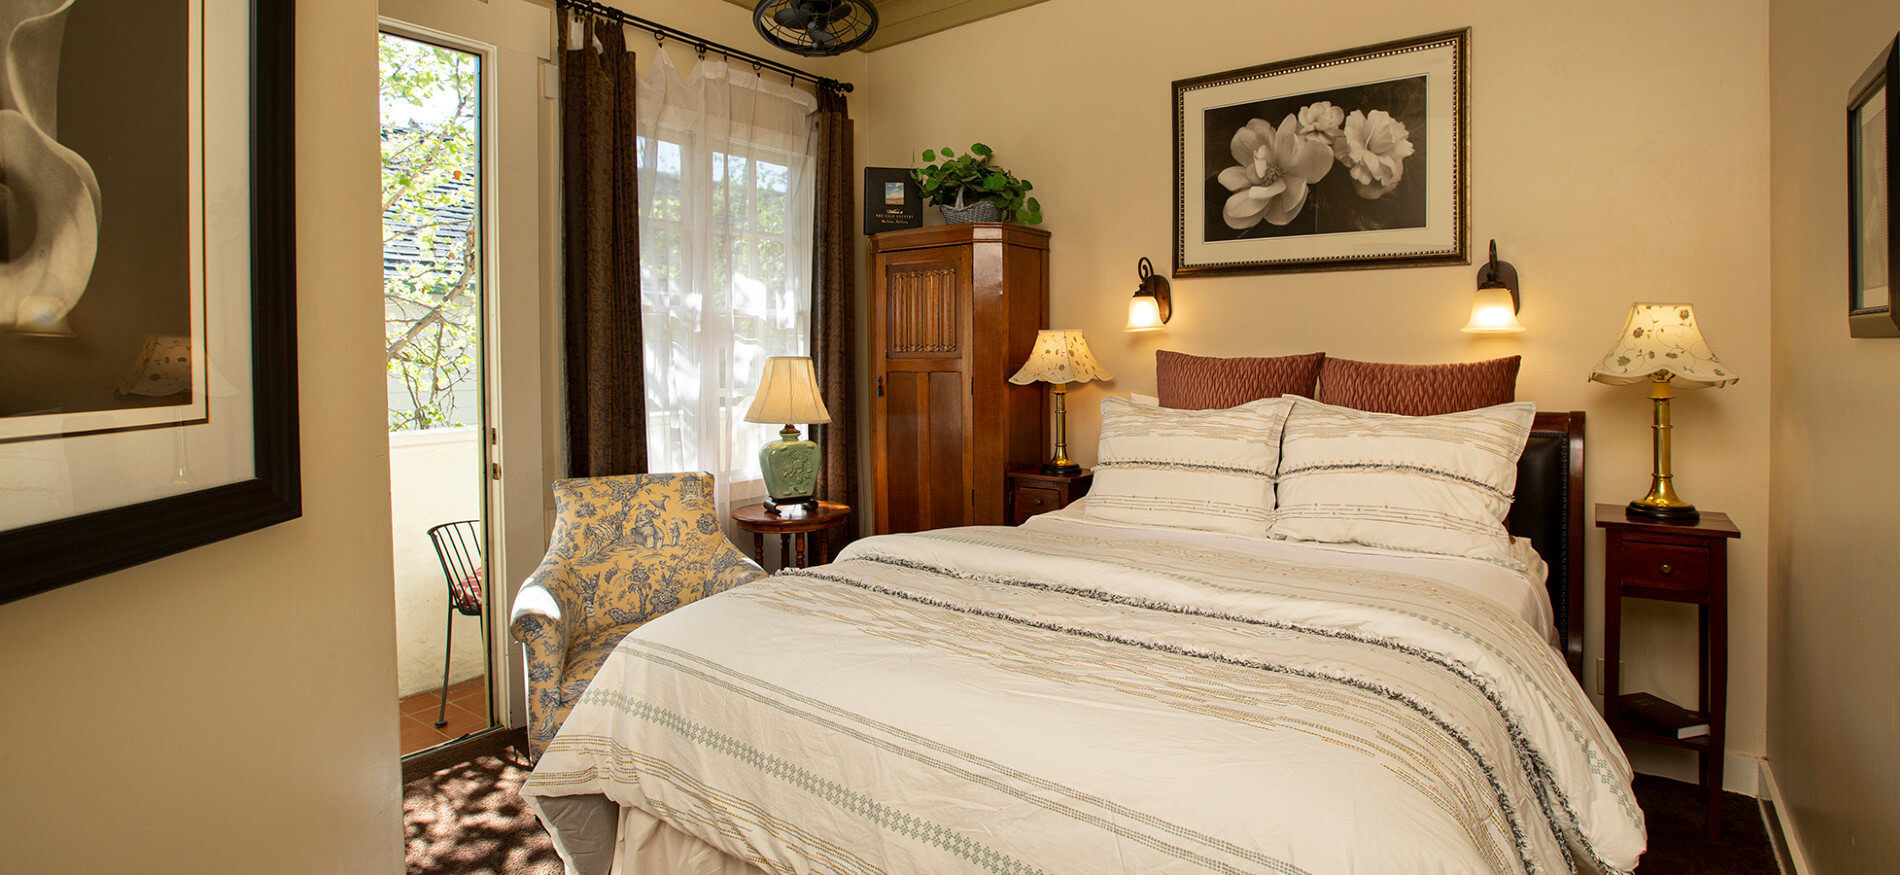 Bed with white comforter and pillows, ivory walls, floral picture and two sconces over bed, three nightstands with lamps